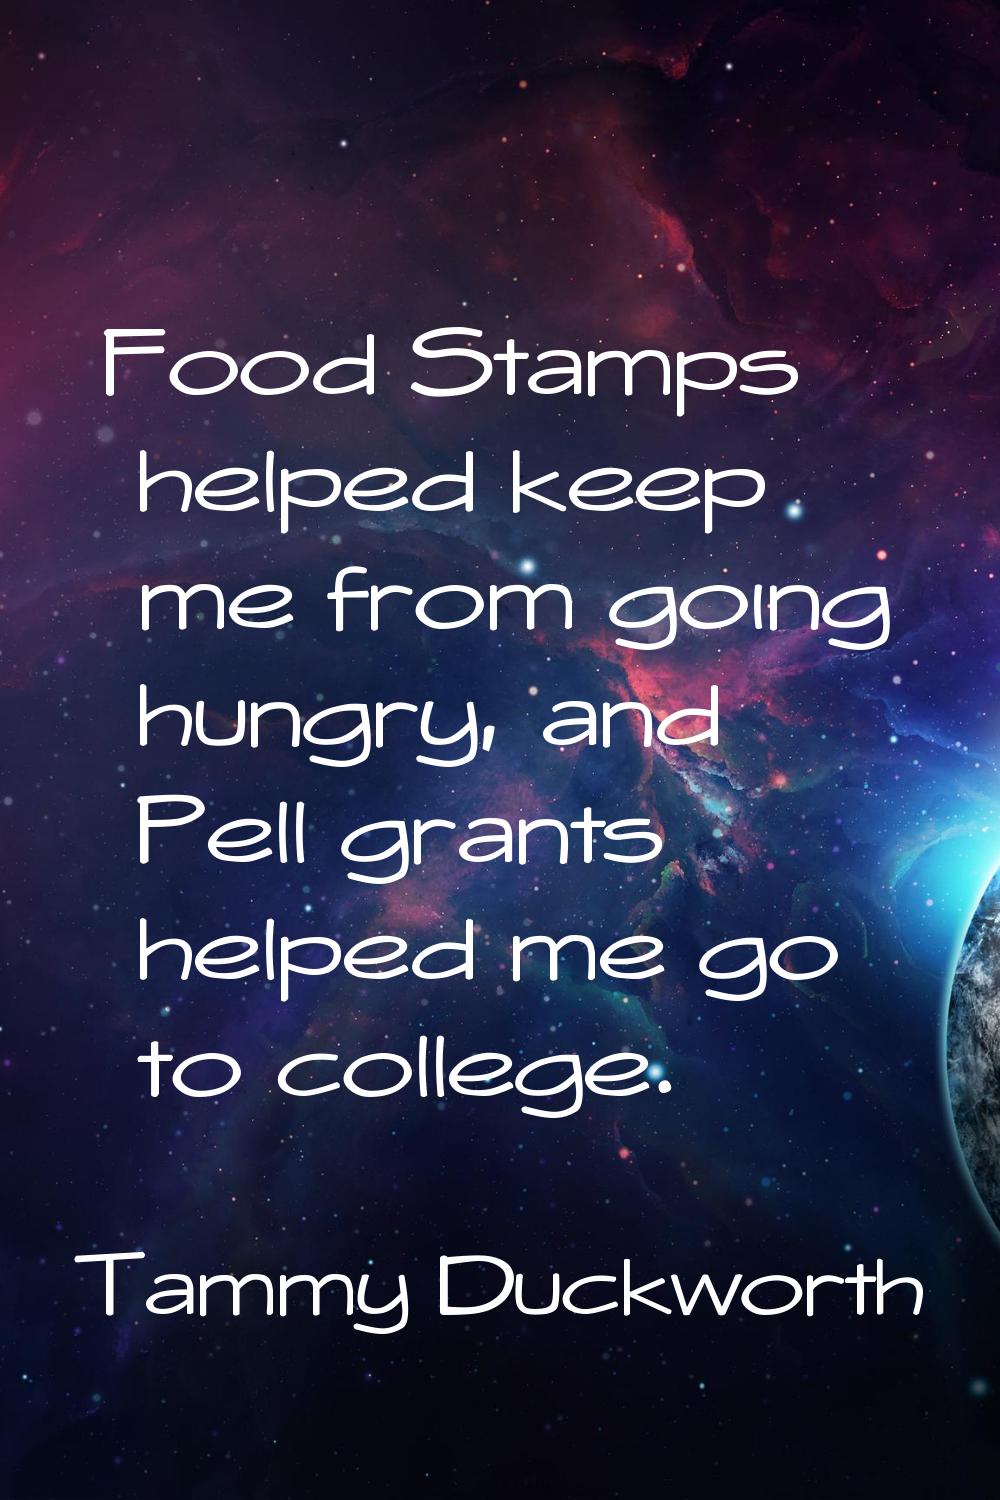 Food Stamps helped keep me from going hungry, and Pell grants helped me go to college.